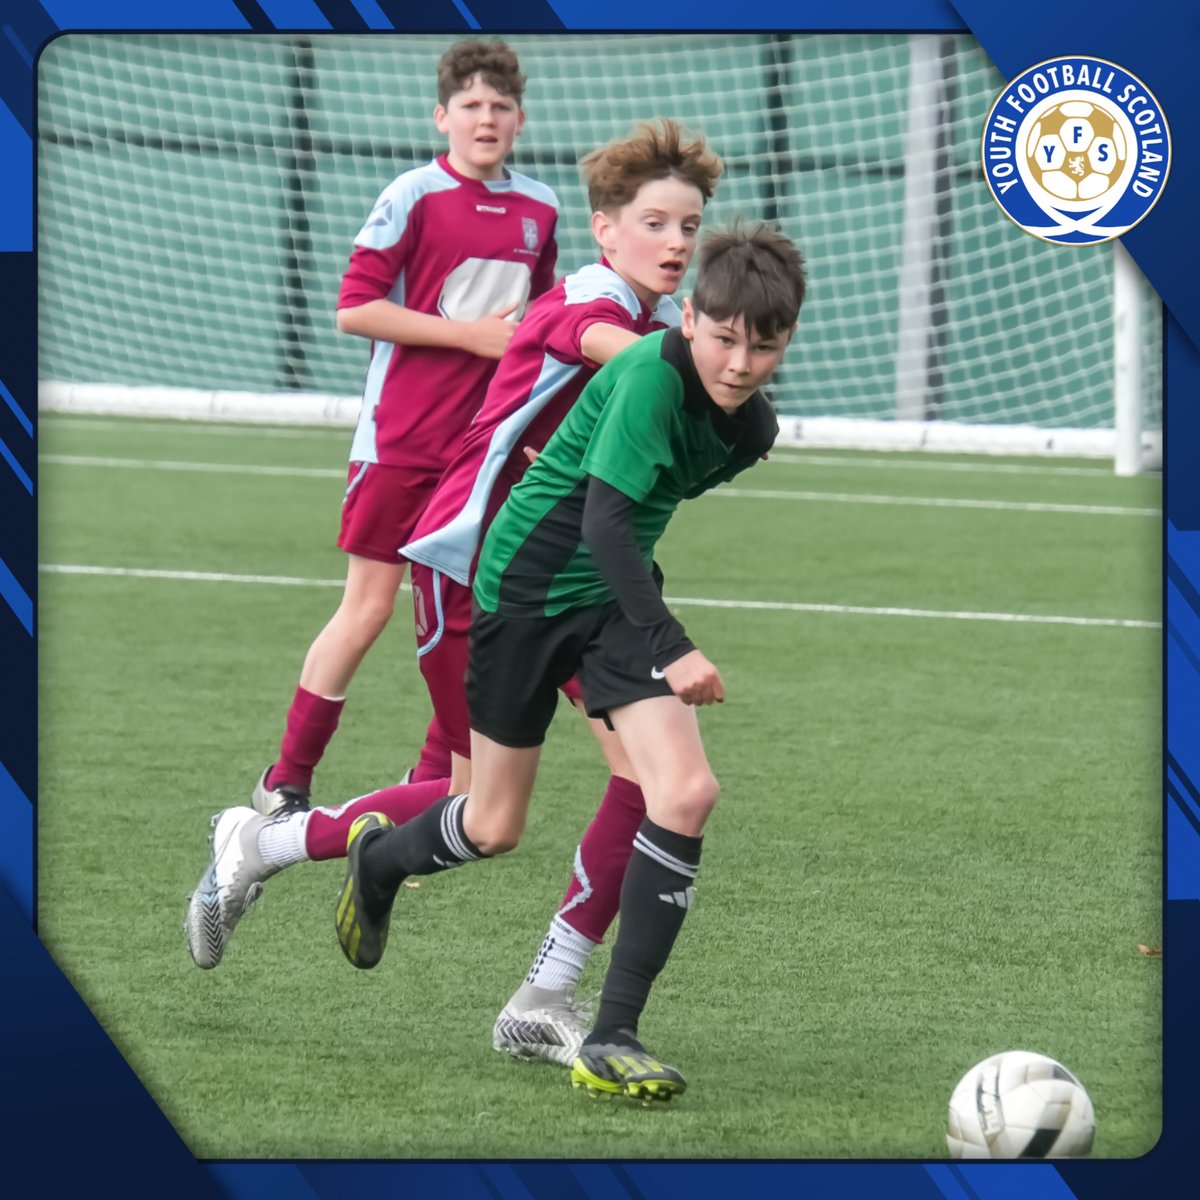 𝗣𝗛𝗢𝗧𝗢 𝗚𝗔𝗟𝗟𝗘𝗥𝗬 📸 Photo gallery, courtesy of 𝗥𝗮𝗰𝗵𝗮𝗲𝗹 𝗕𝘂𝗰𝗵𝗮𝗻𝗮𝗻 from the recent U13 Paisley and District Schools FA Cup Final between @StStephensHS and @snhsfootball. ➡️ View gallery: yfsphotos.co.uk/p947594719